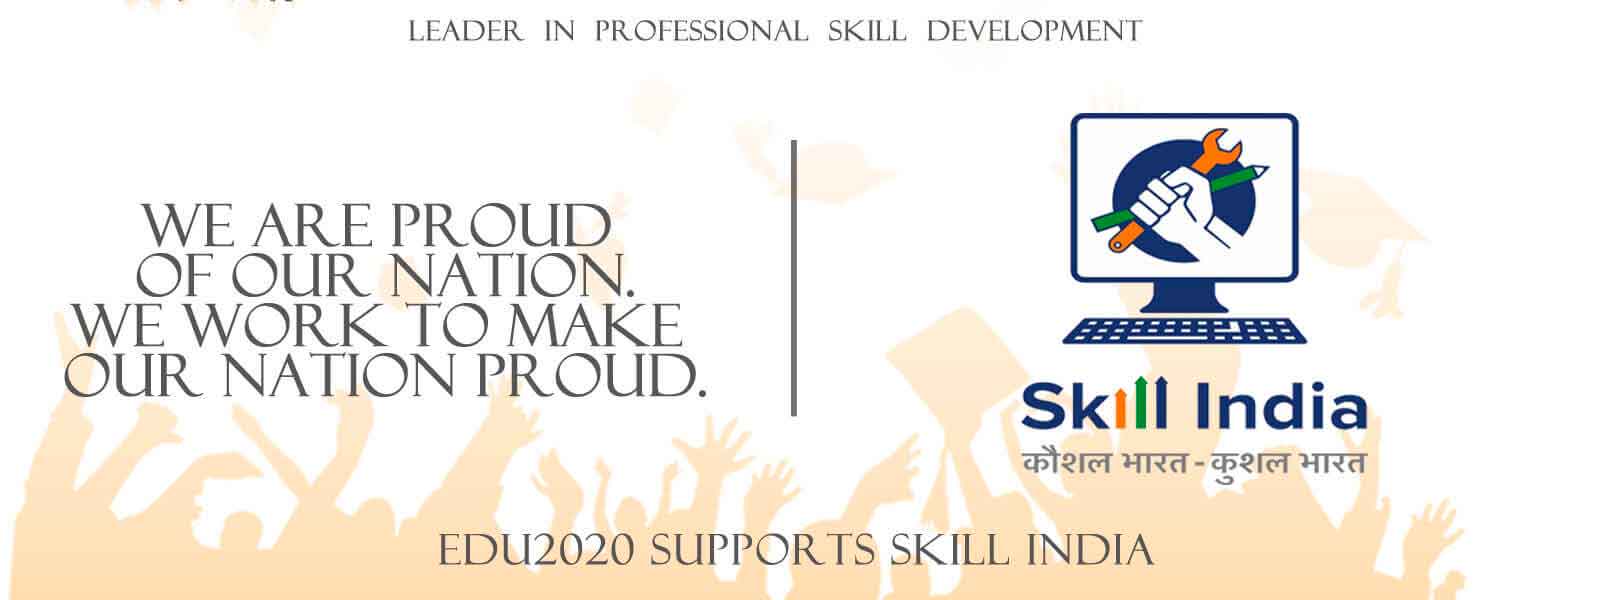 we believe in skill development in India and want to help achieve this vision